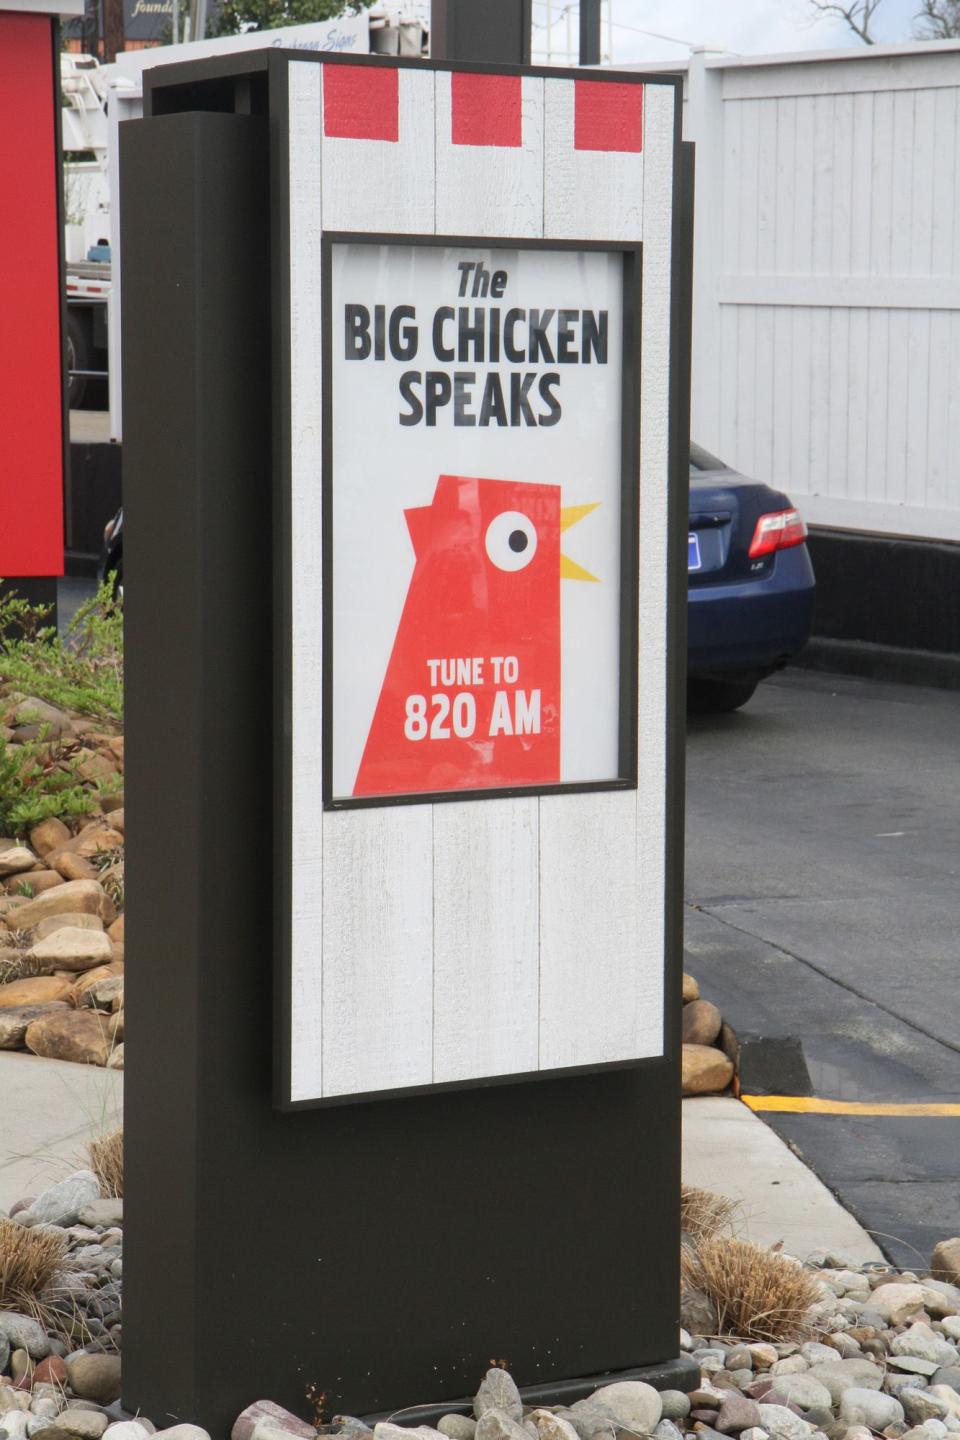 You can even hear The Big Chicken talk!